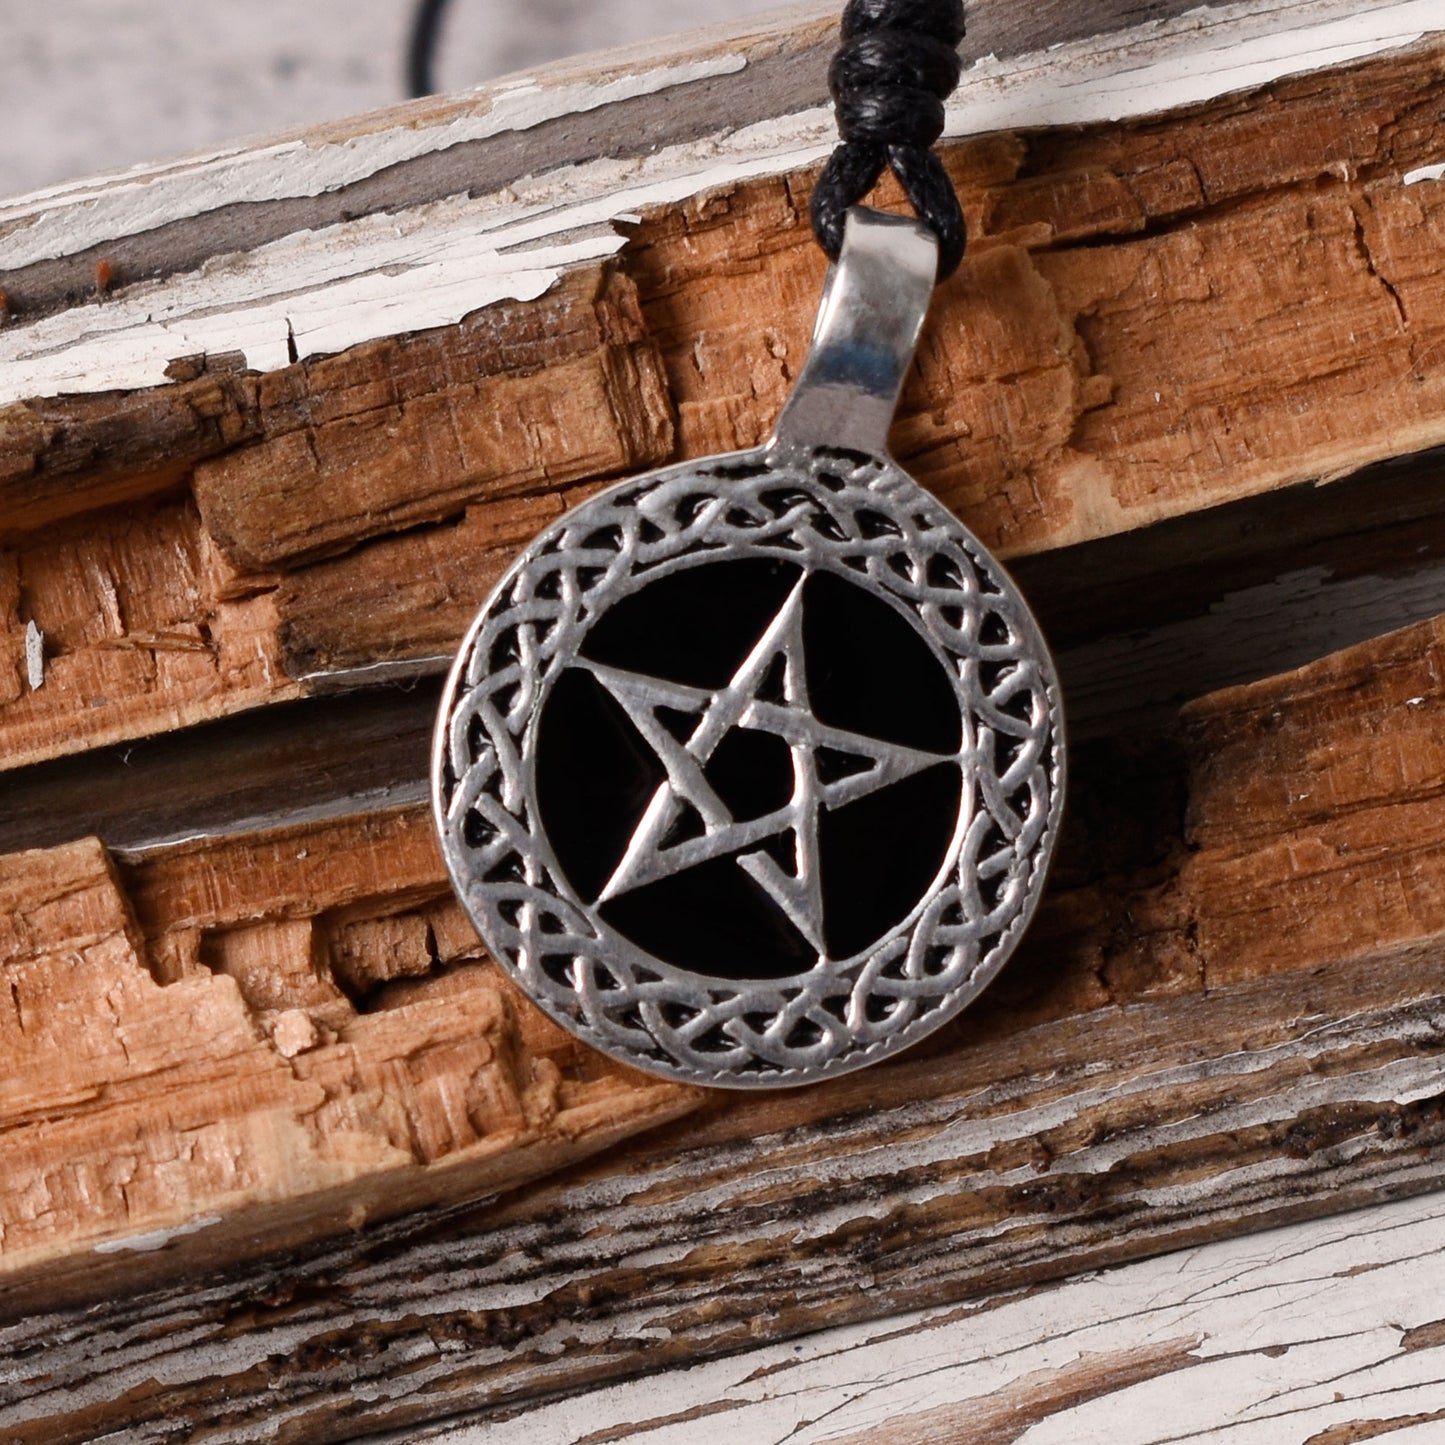 5 Pointed Pentagram Star Magic Silver Pewter Charm Necklace Pendant Jewelry